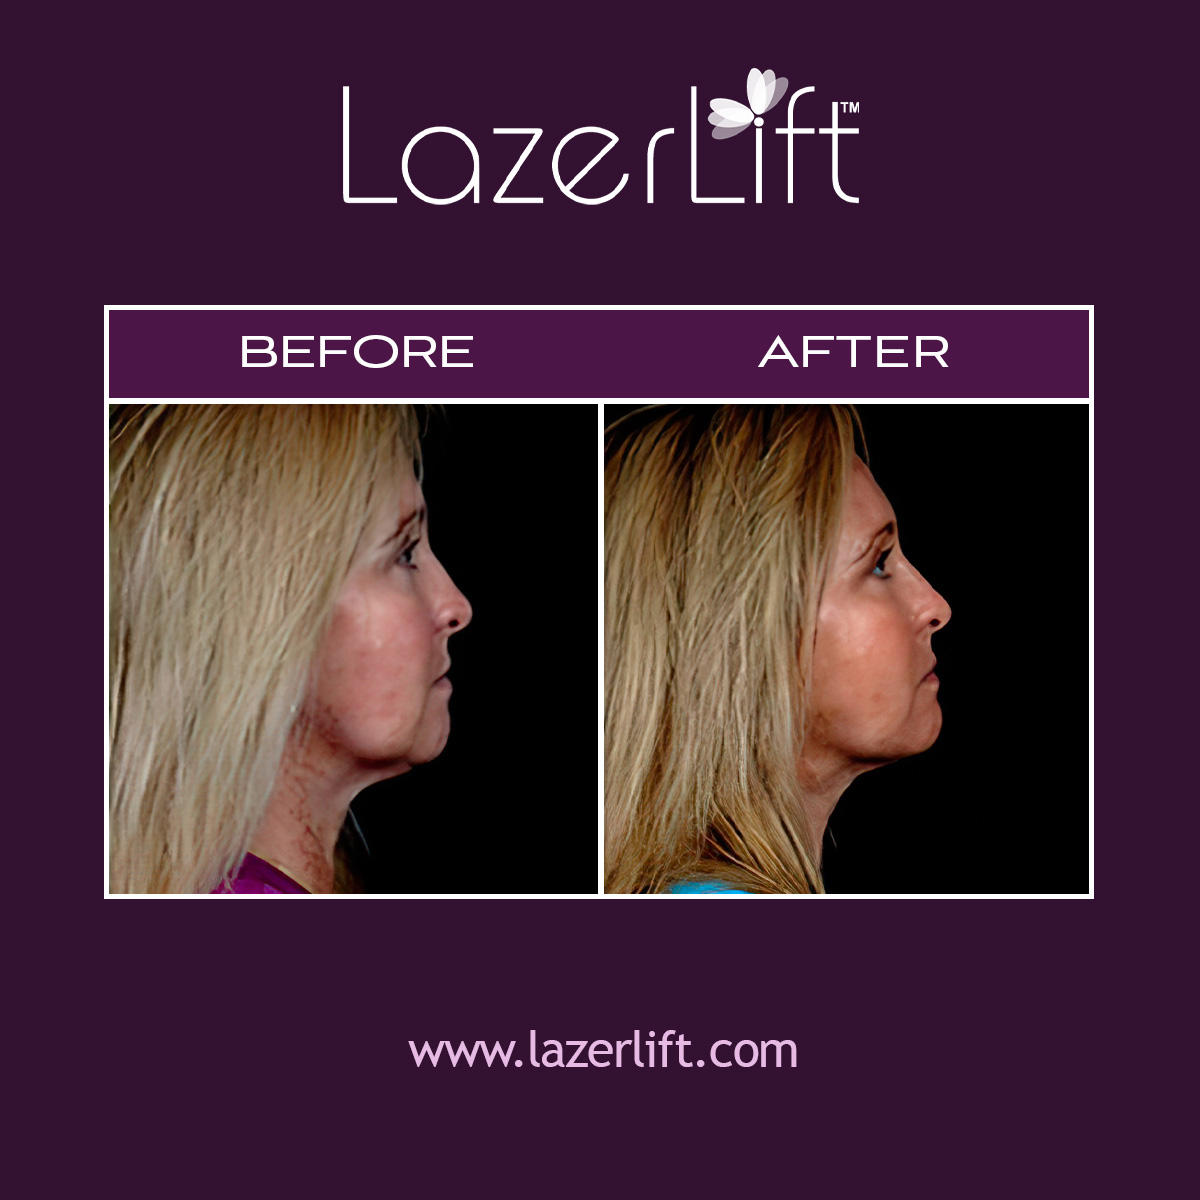 Laser jowl lift in Orlando uses revolutionary LazerLift® technology to improve jawline definition and remove fatty deposits under the chin. LazerLift® provides a gentler approach to diminishing the appearance of jowls when compared to traditional jowl lift surgery. LazerLift® to treat jowls provides a quick, safe, and effective way to improve overall facial appearance.